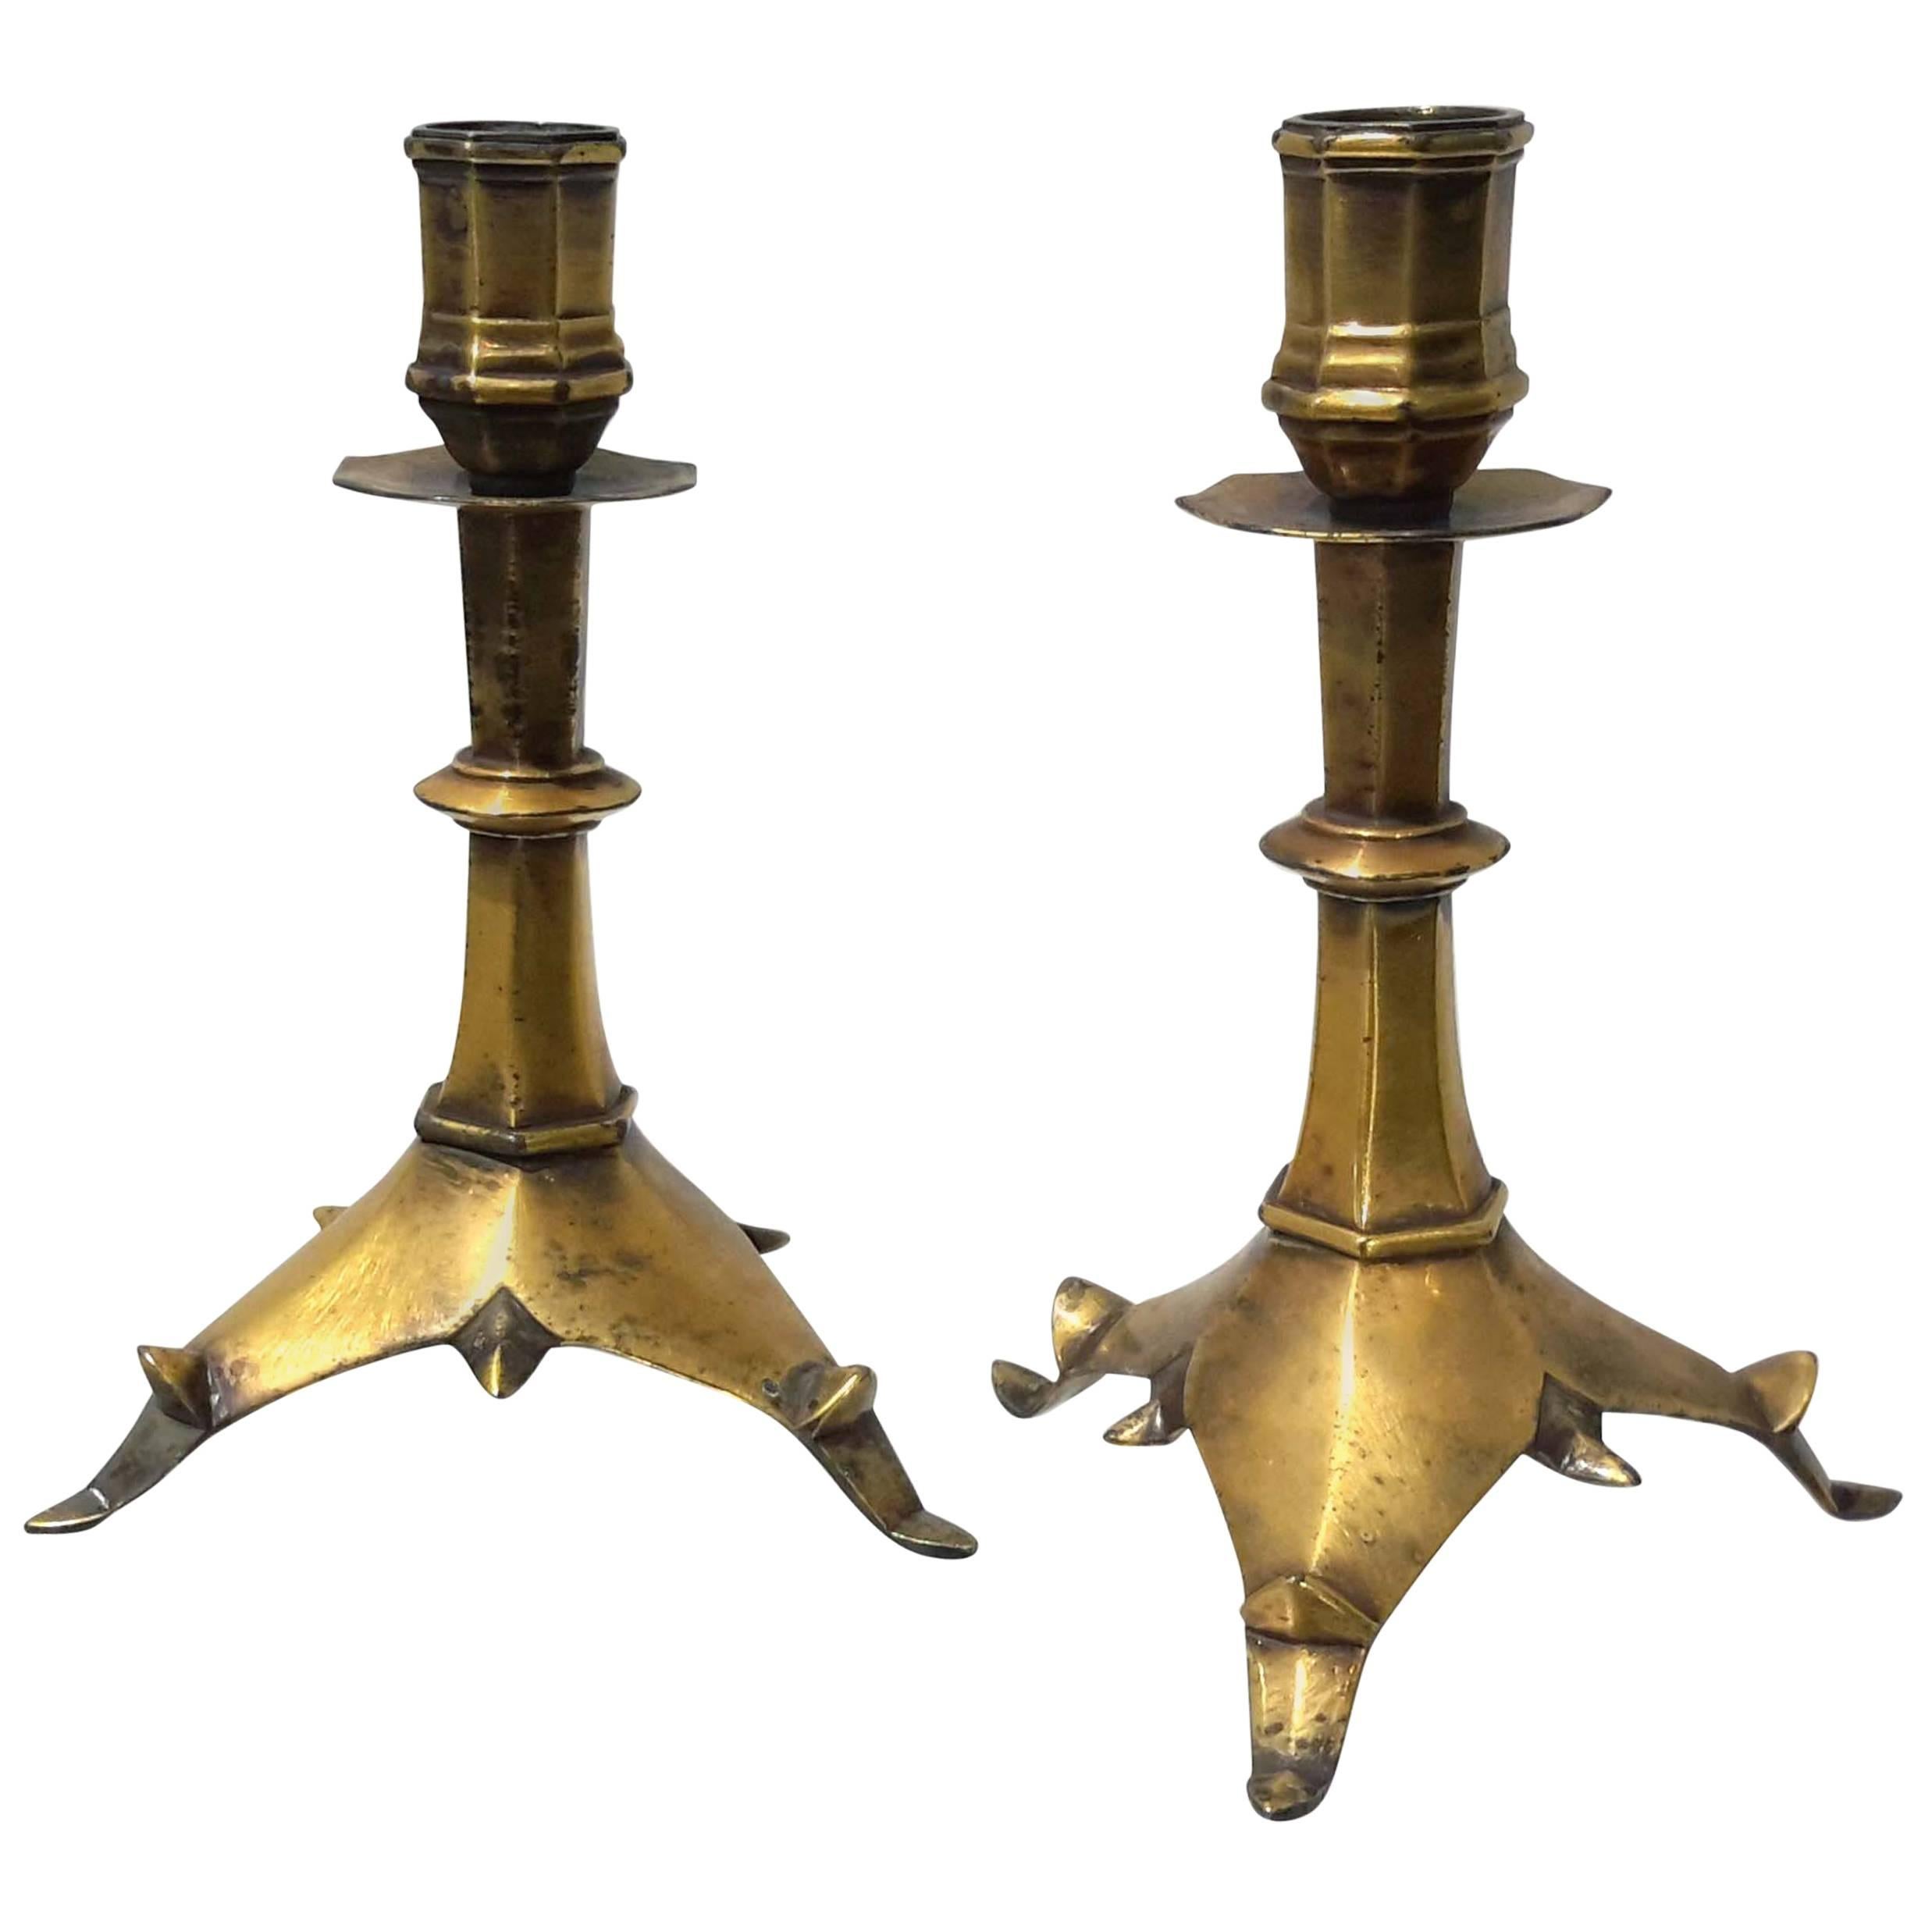 Pair of French Gothic Candlesticks Retailed by Tiffany & Co., 19th Century